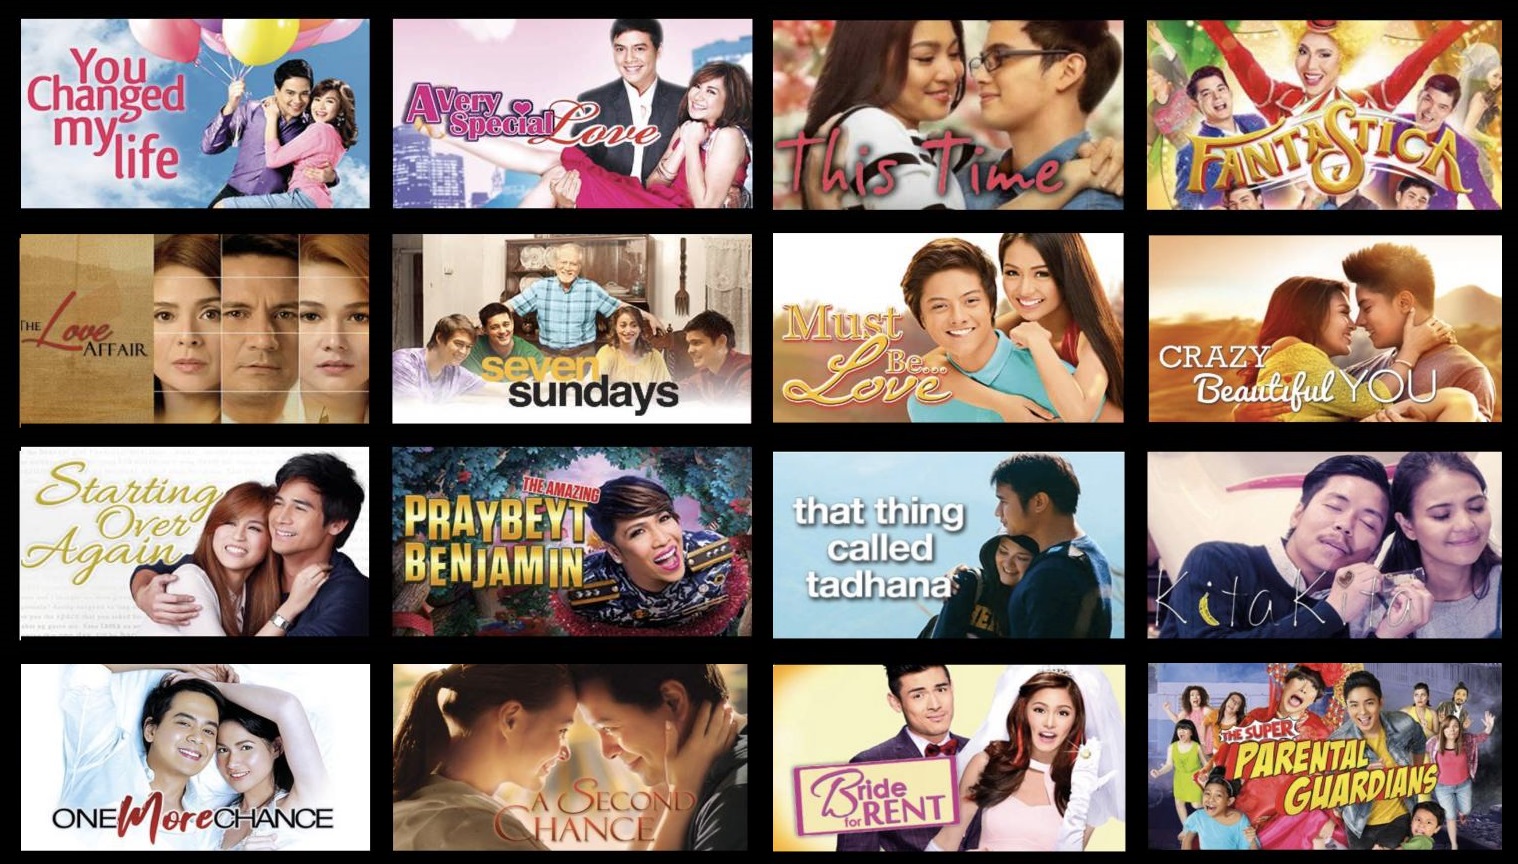 dorothy sherwood recommends watch tagalog movie online pic